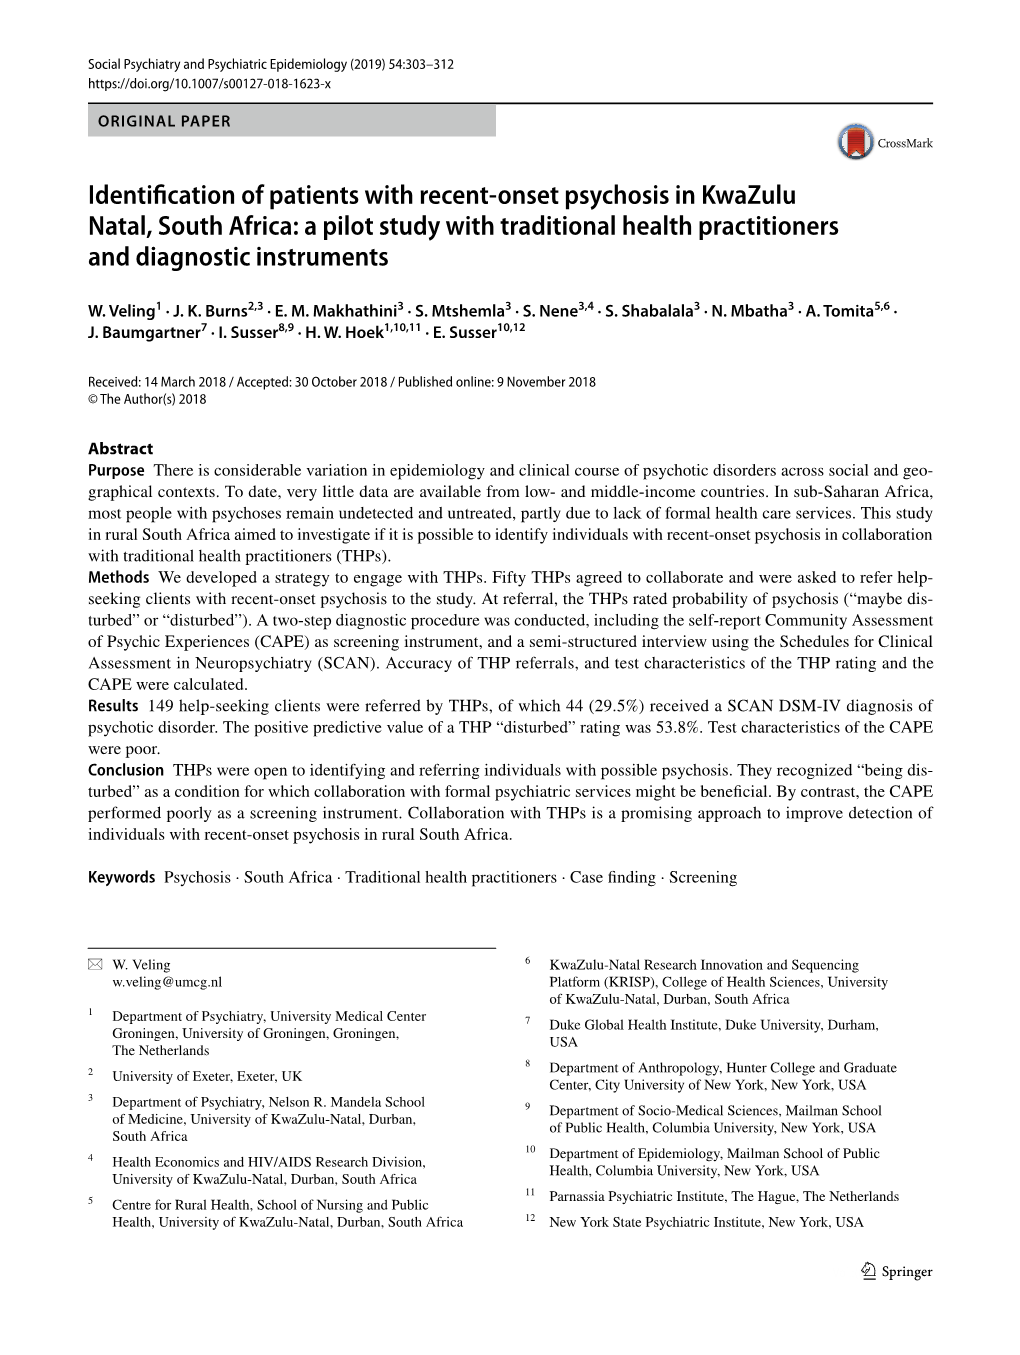 Identification of Patients with Recent-Onset Psychosis in Kwazulu Natal, South Africa: a Pilot Study with Traditional Health Practitioners and Diagnostic Instruments